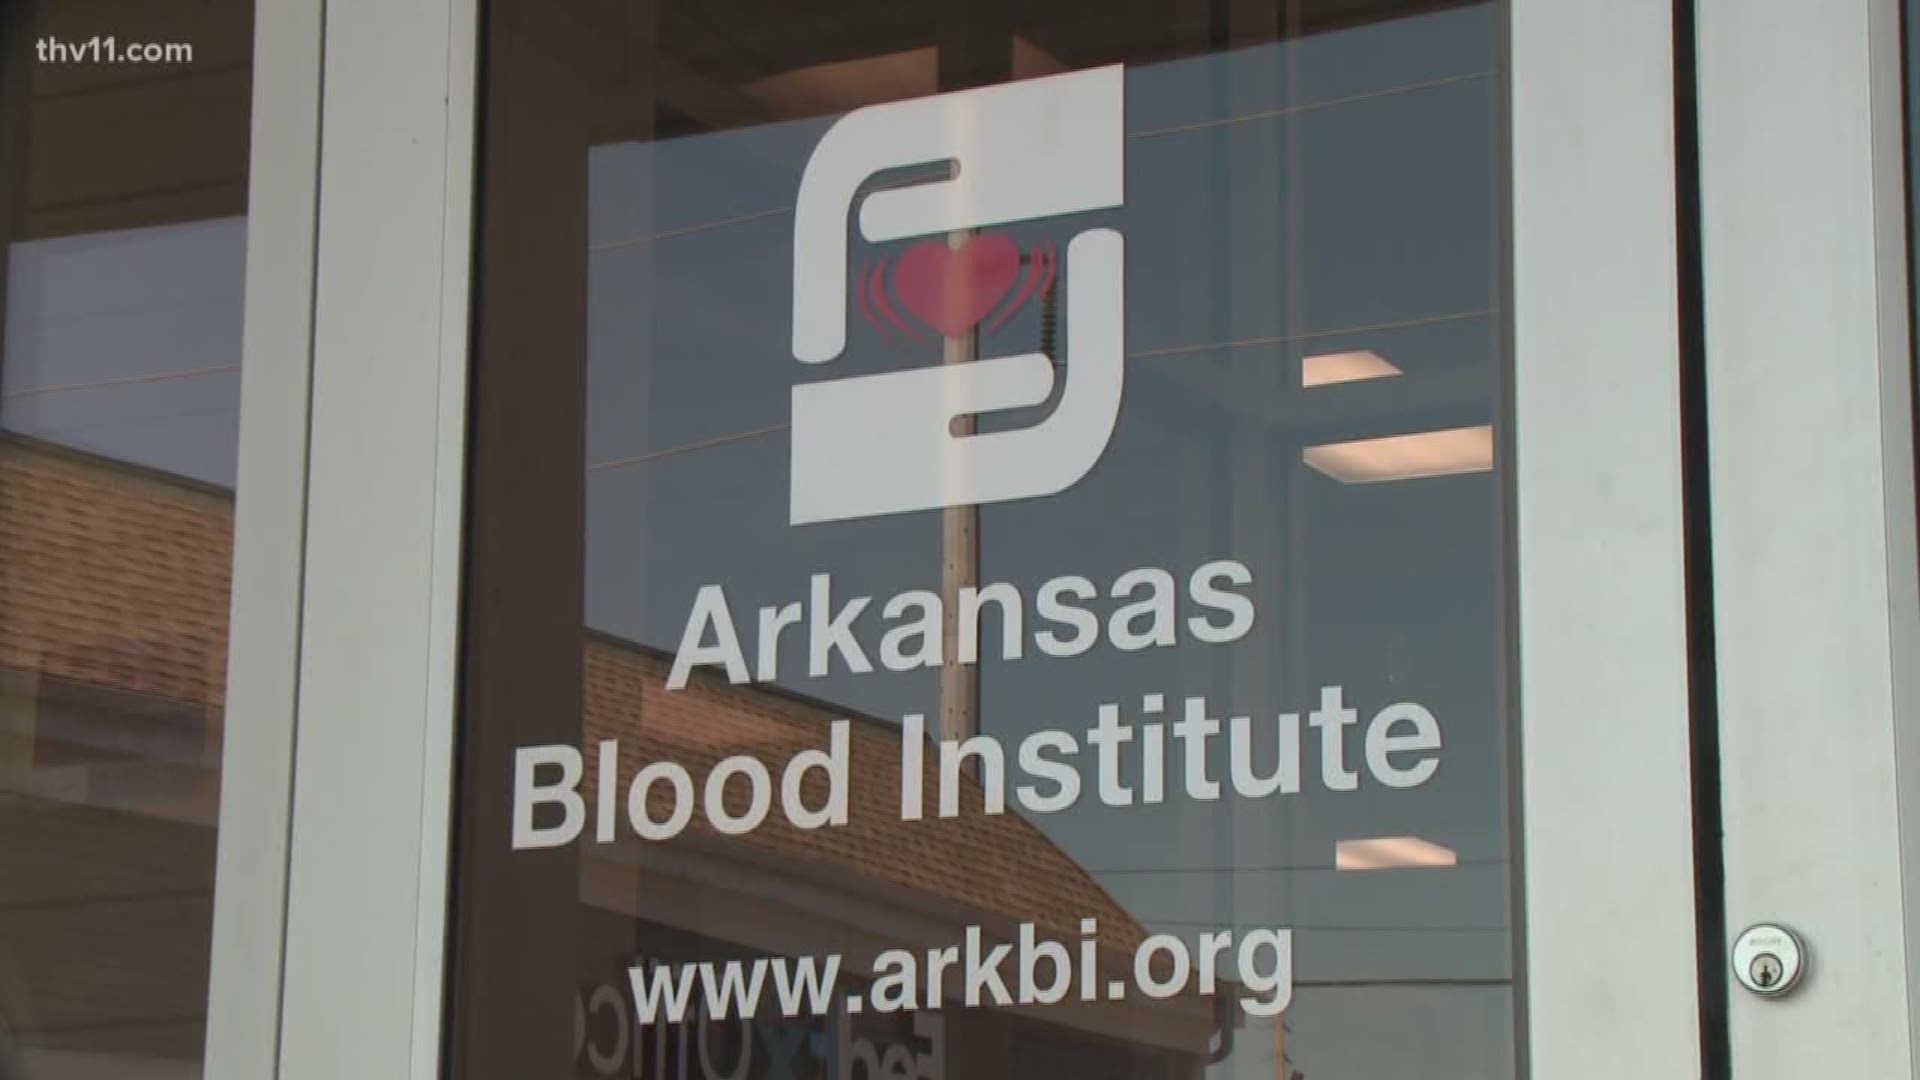 You may be thinking of love and hearts today, but the Arkansas Blood Institute hopes you'll take it one step further and think about saving a life.